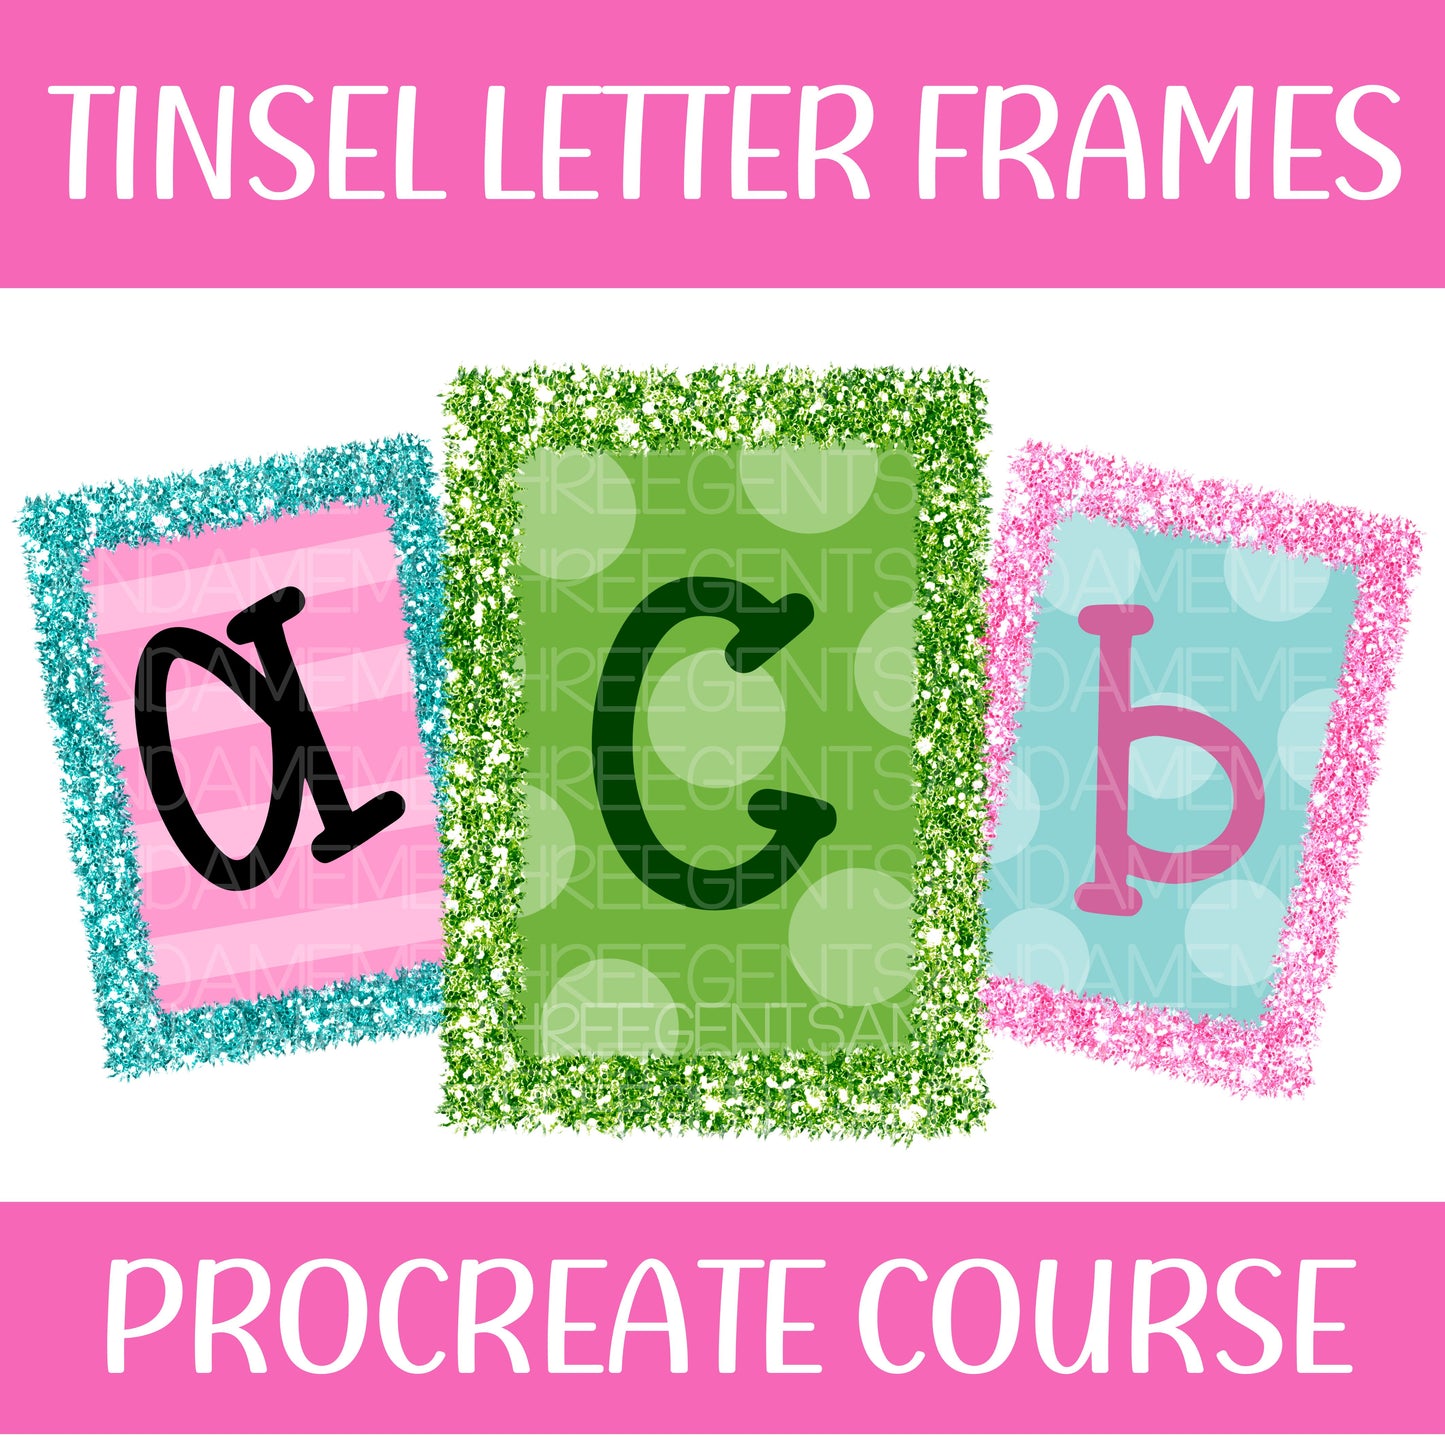 TINSEL LETTER FRAMES  PROCREATE COURSE